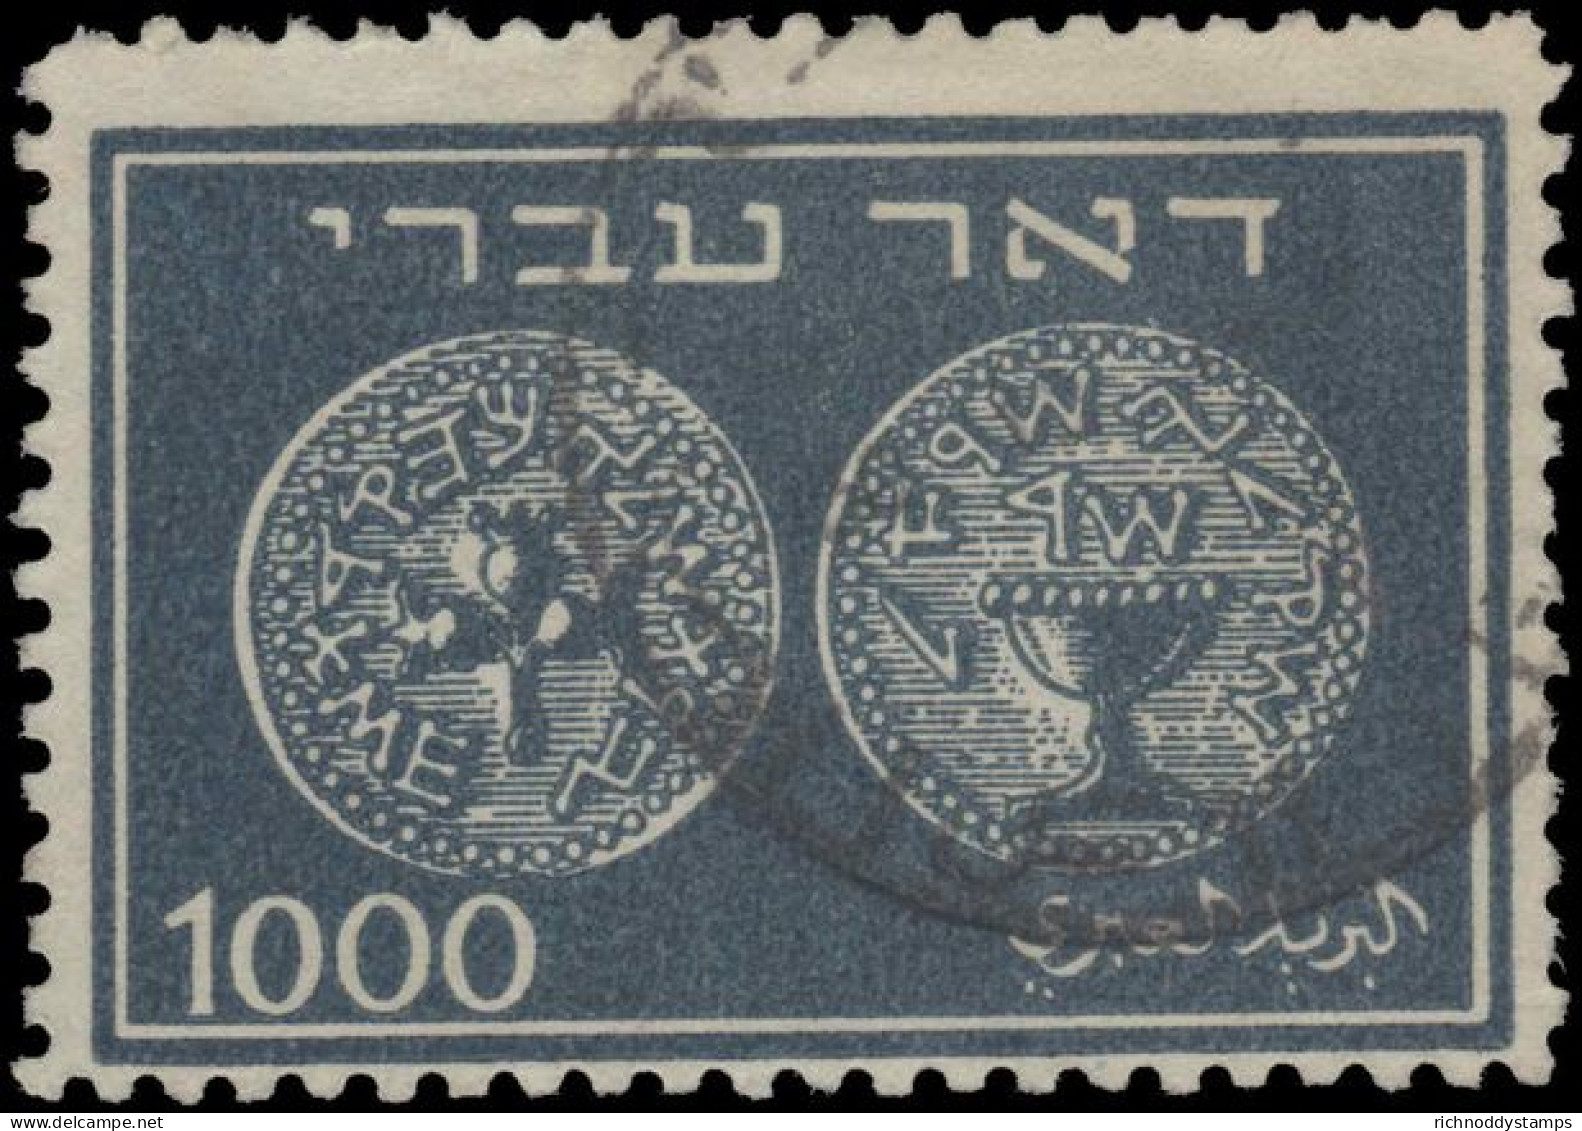 Israel 1948 1000m Coins Perf 11 Fine Used. - Gebraucht (ohne Tabs)